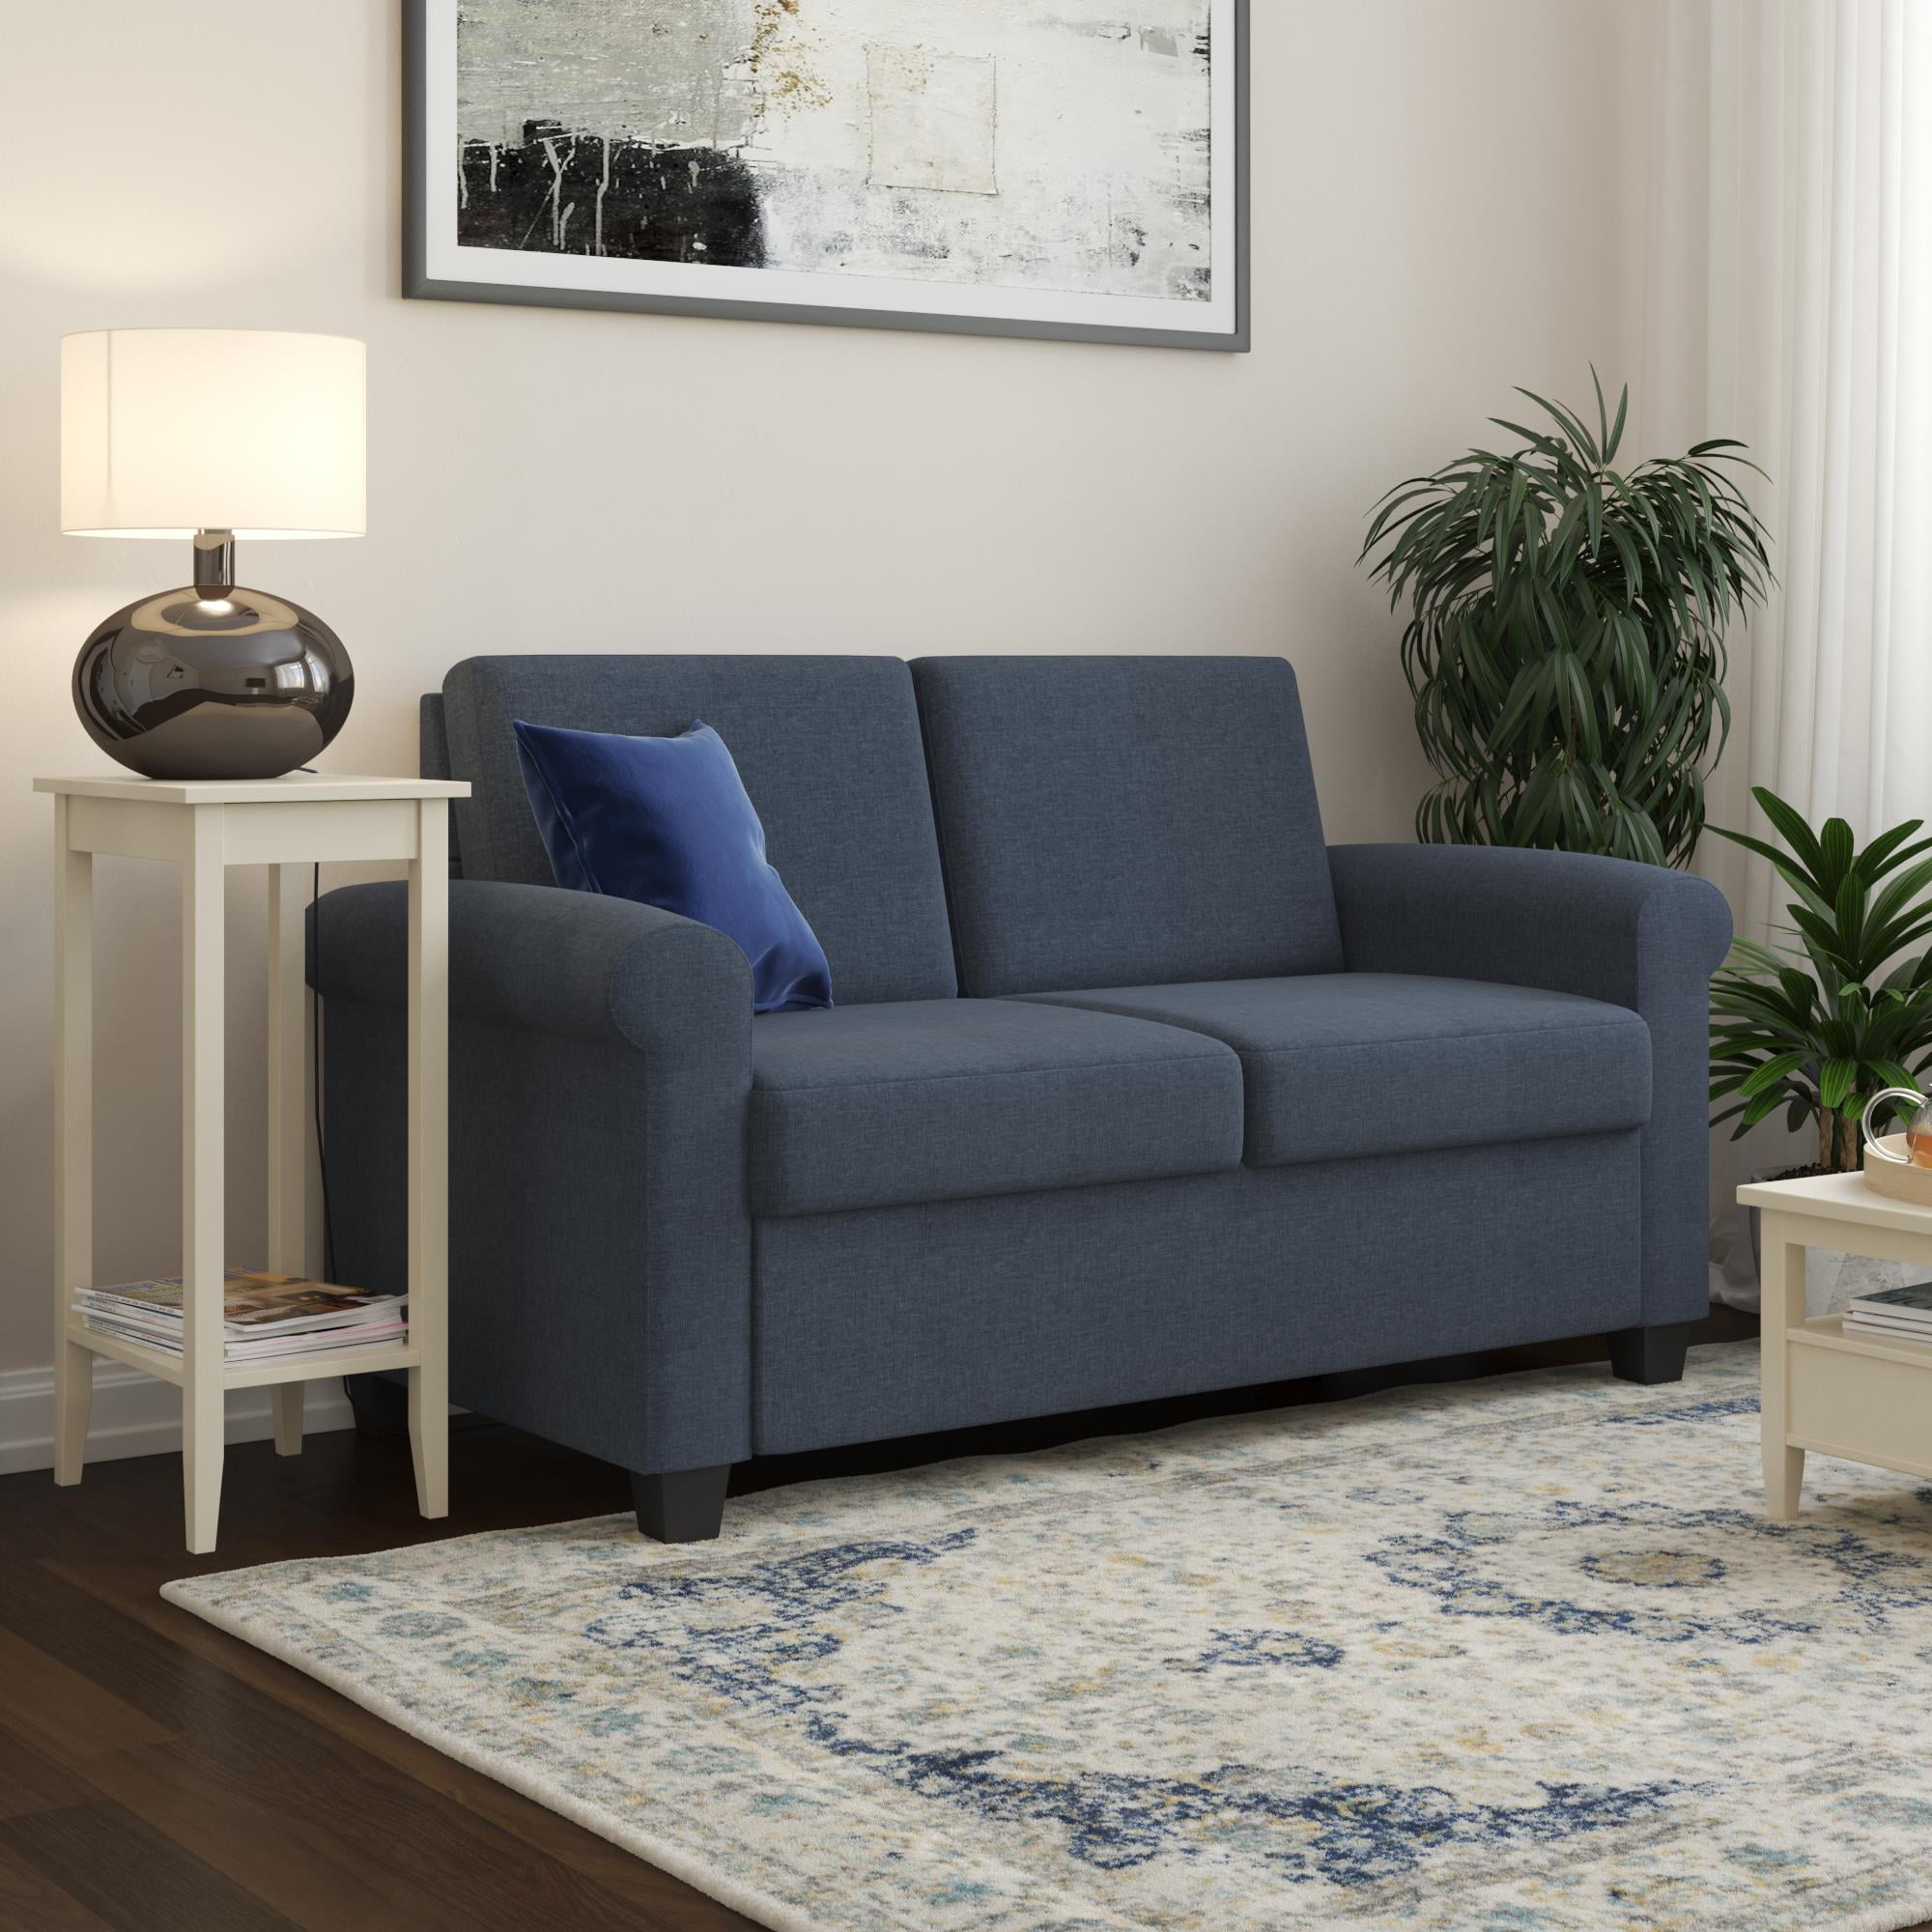 Unique Small Sleeper Sofa for Living room